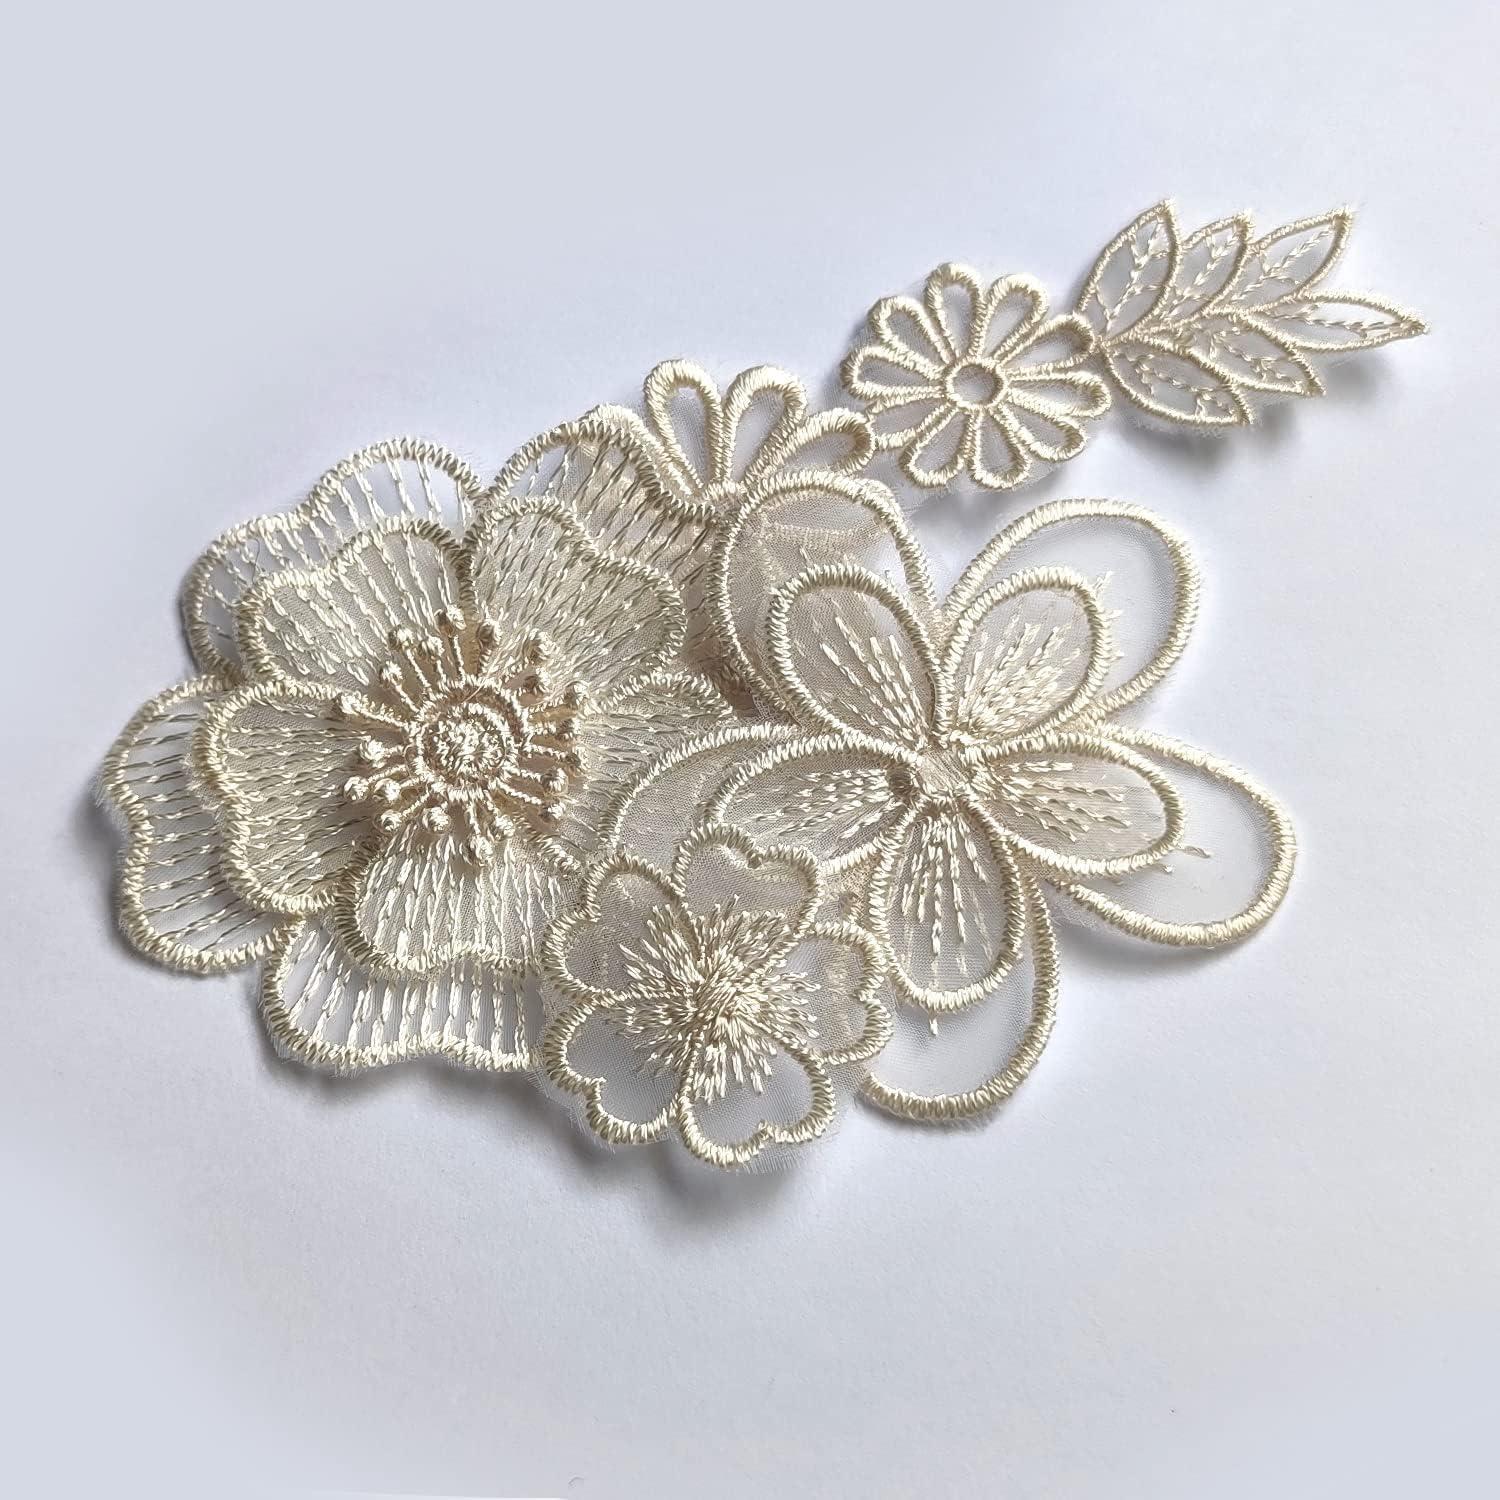 Qililandiy 10 Pcs Beige Mixed Style Embroidery Lace Flower Patches